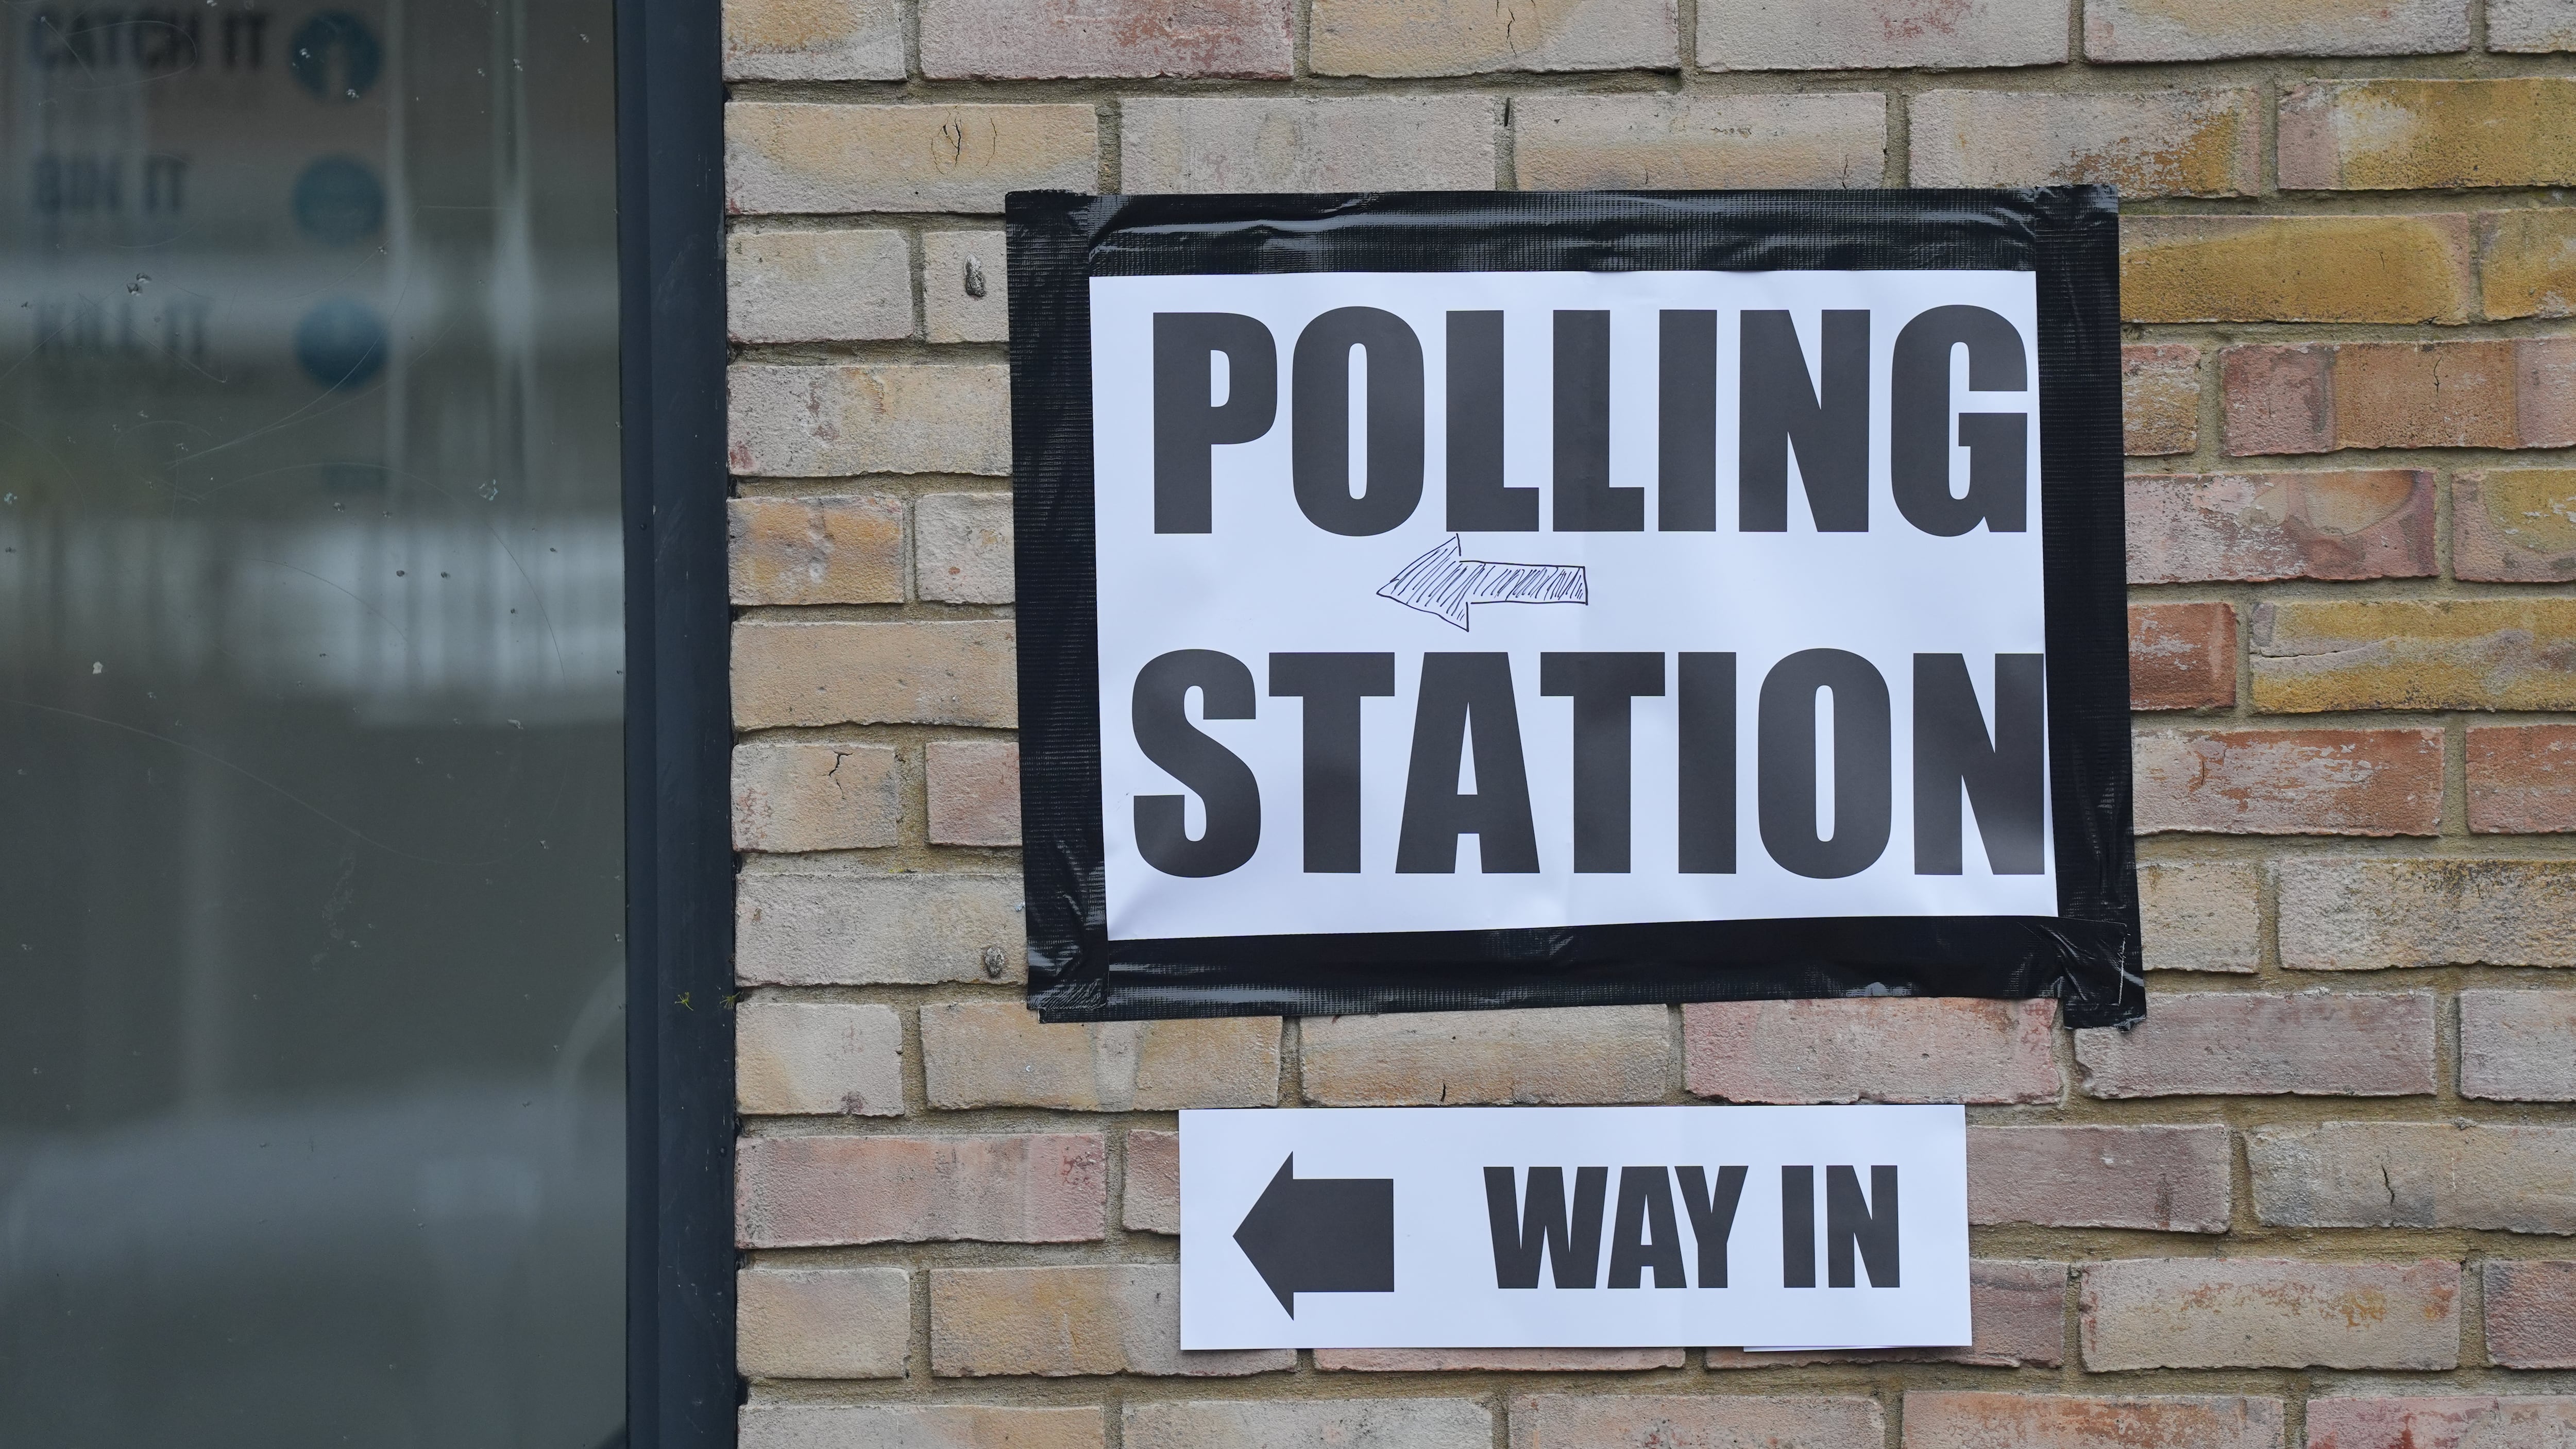 There are two days left of General Election campaigning